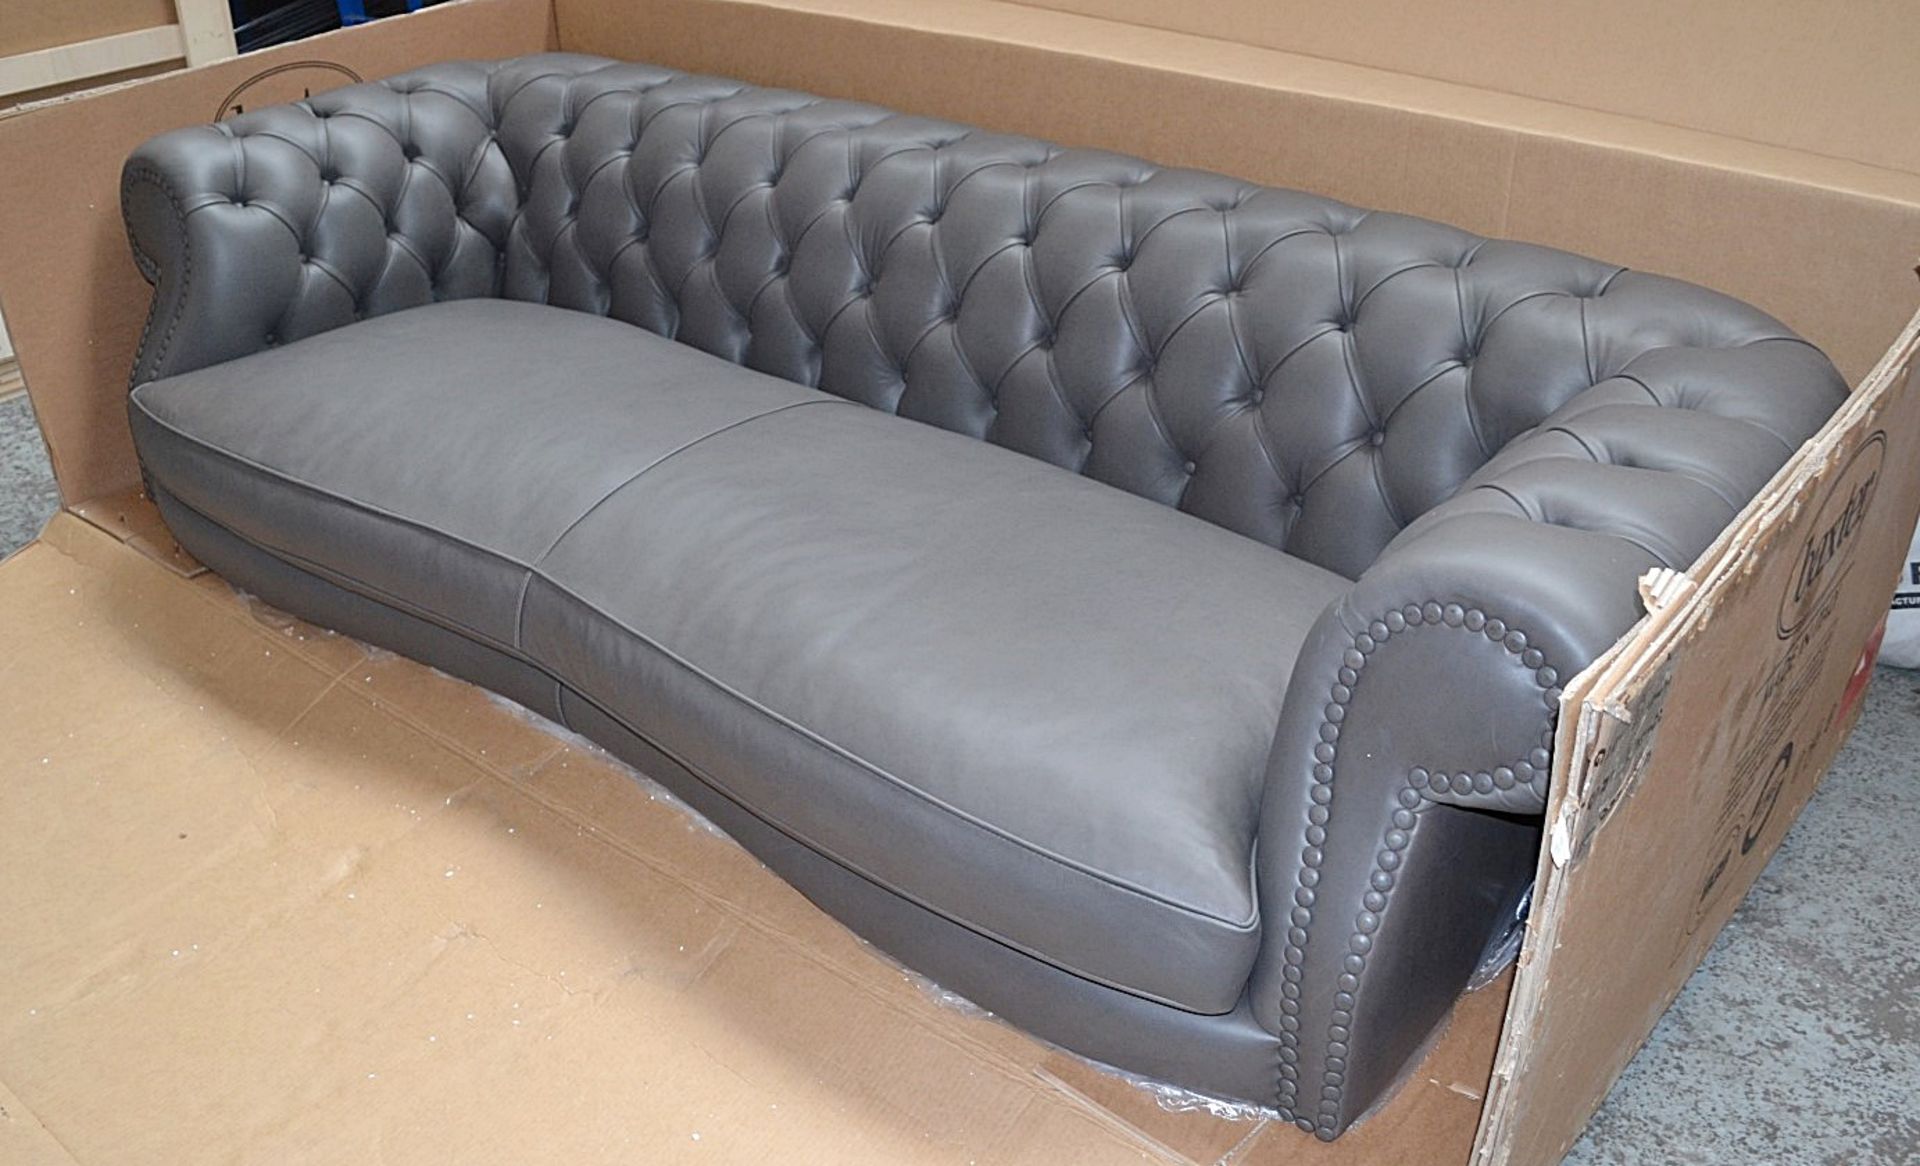 1 x BAXTER Diana Chester Sofa Upholstered In A Rich Grey Leather - Italian Made - Dimensions: - Image 4 of 7